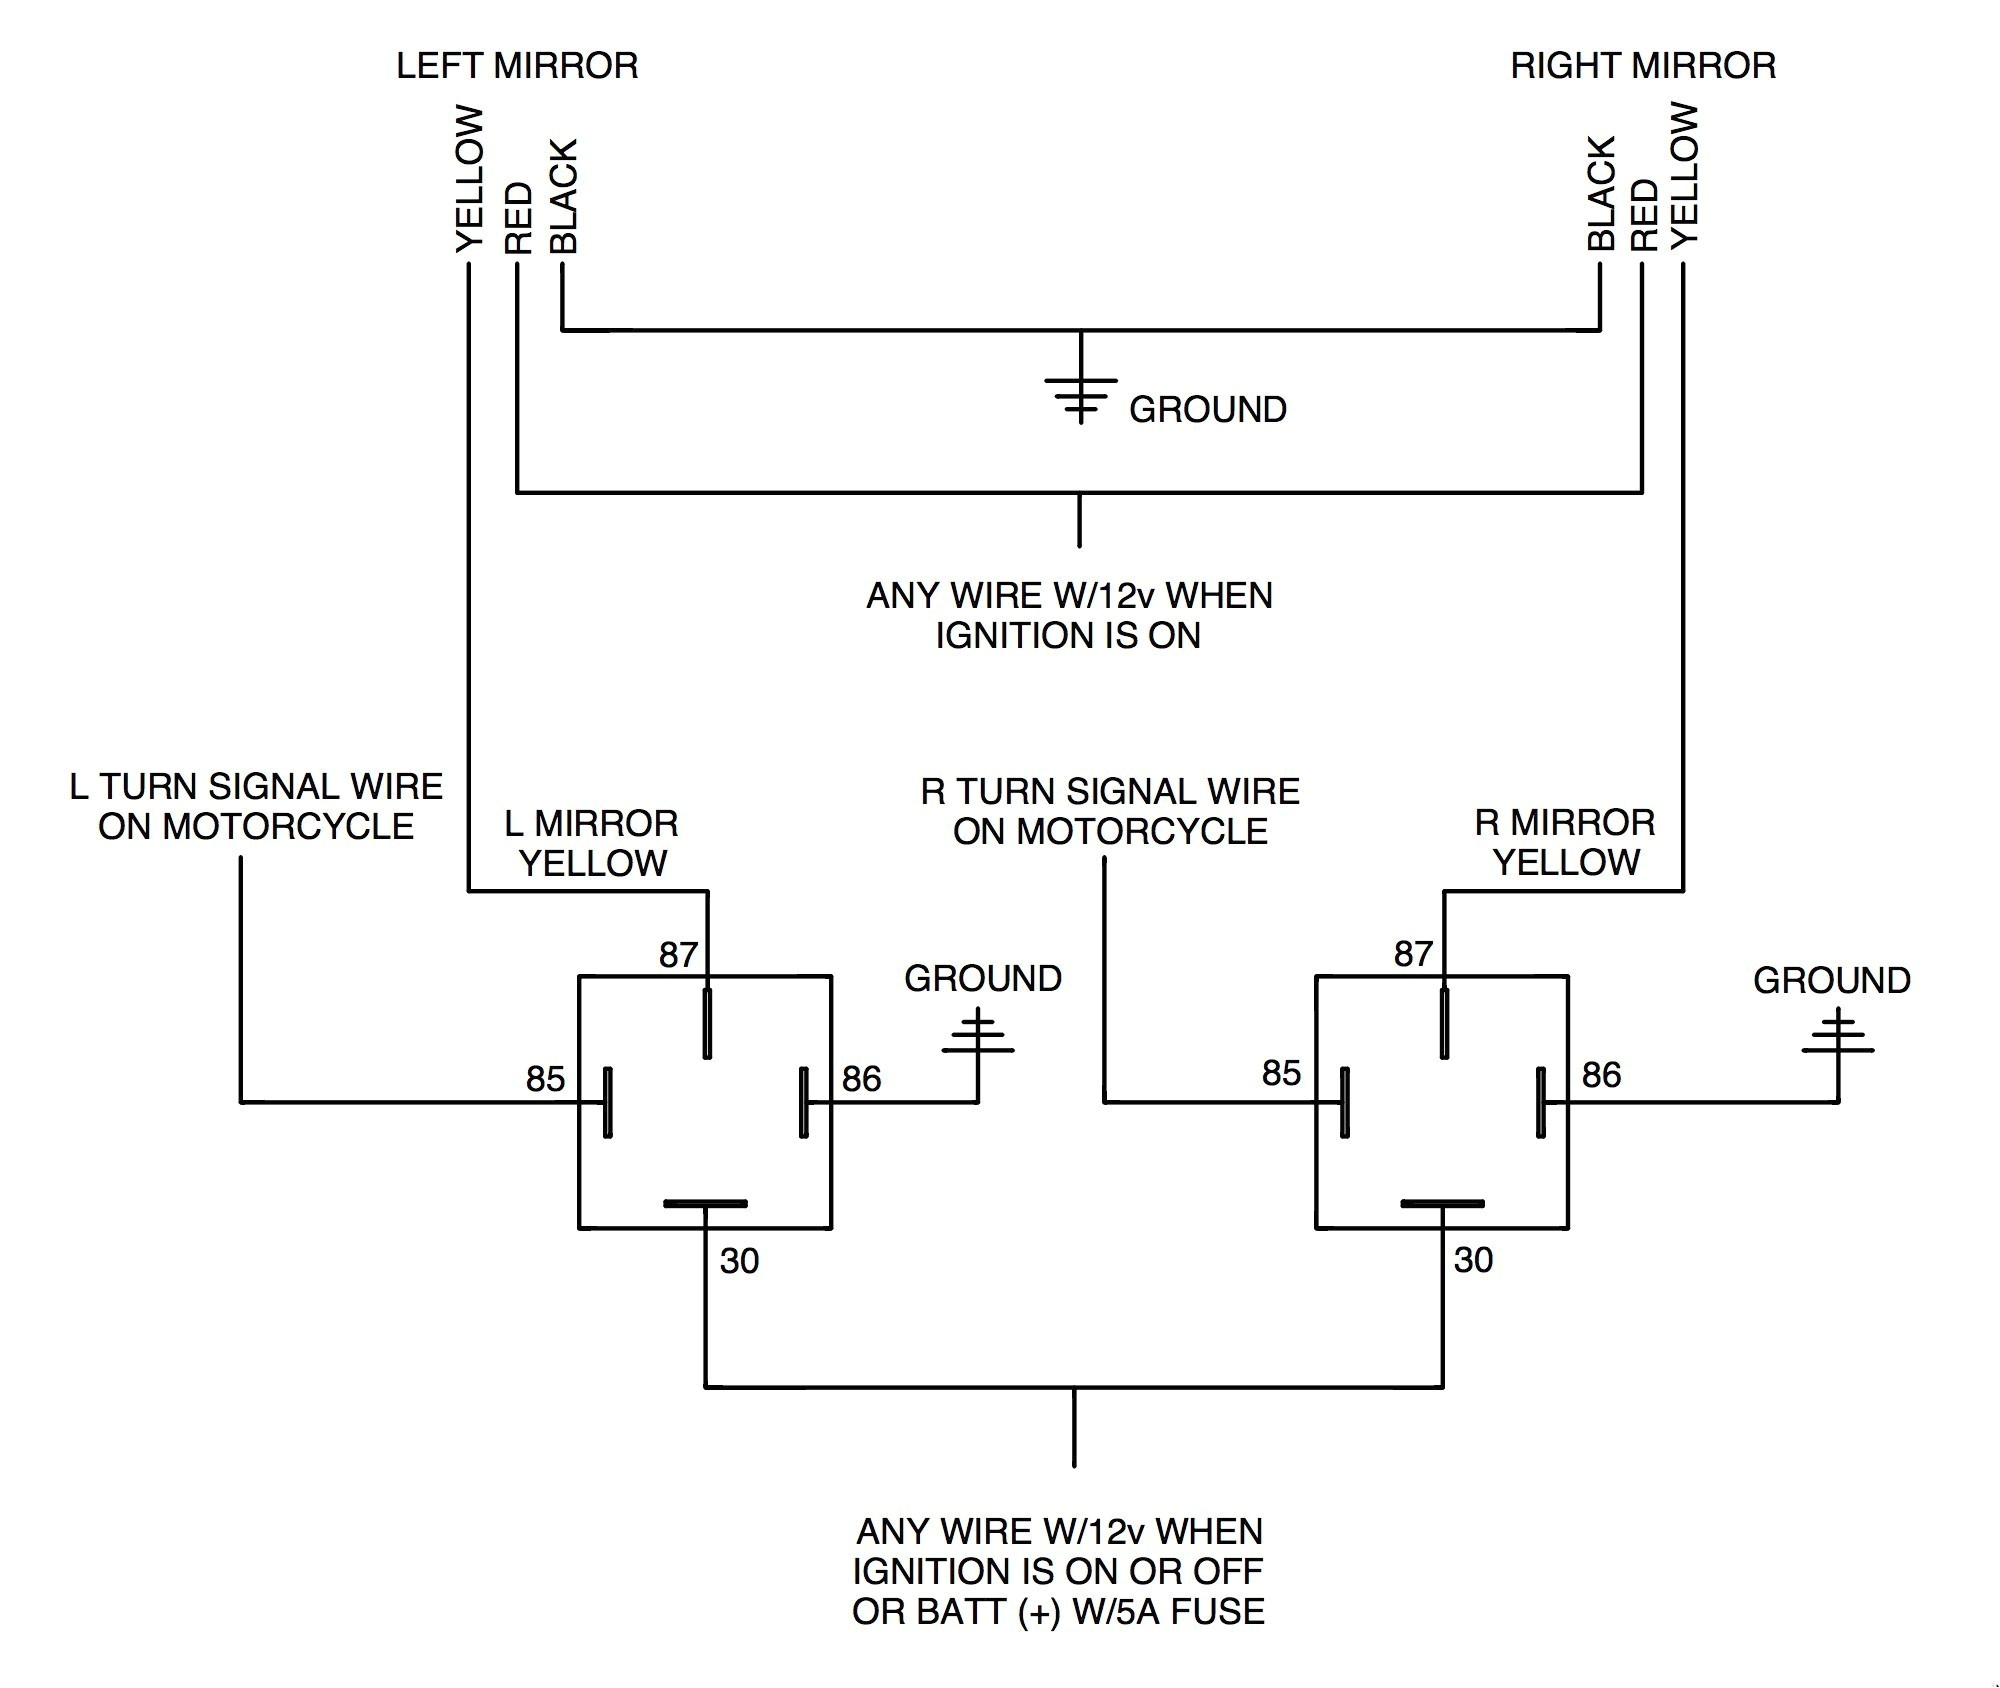 Flasher Wiring Diagram Wiring Diagram for 3 Pin Flasher Unit Unique Turn Signal Wiring